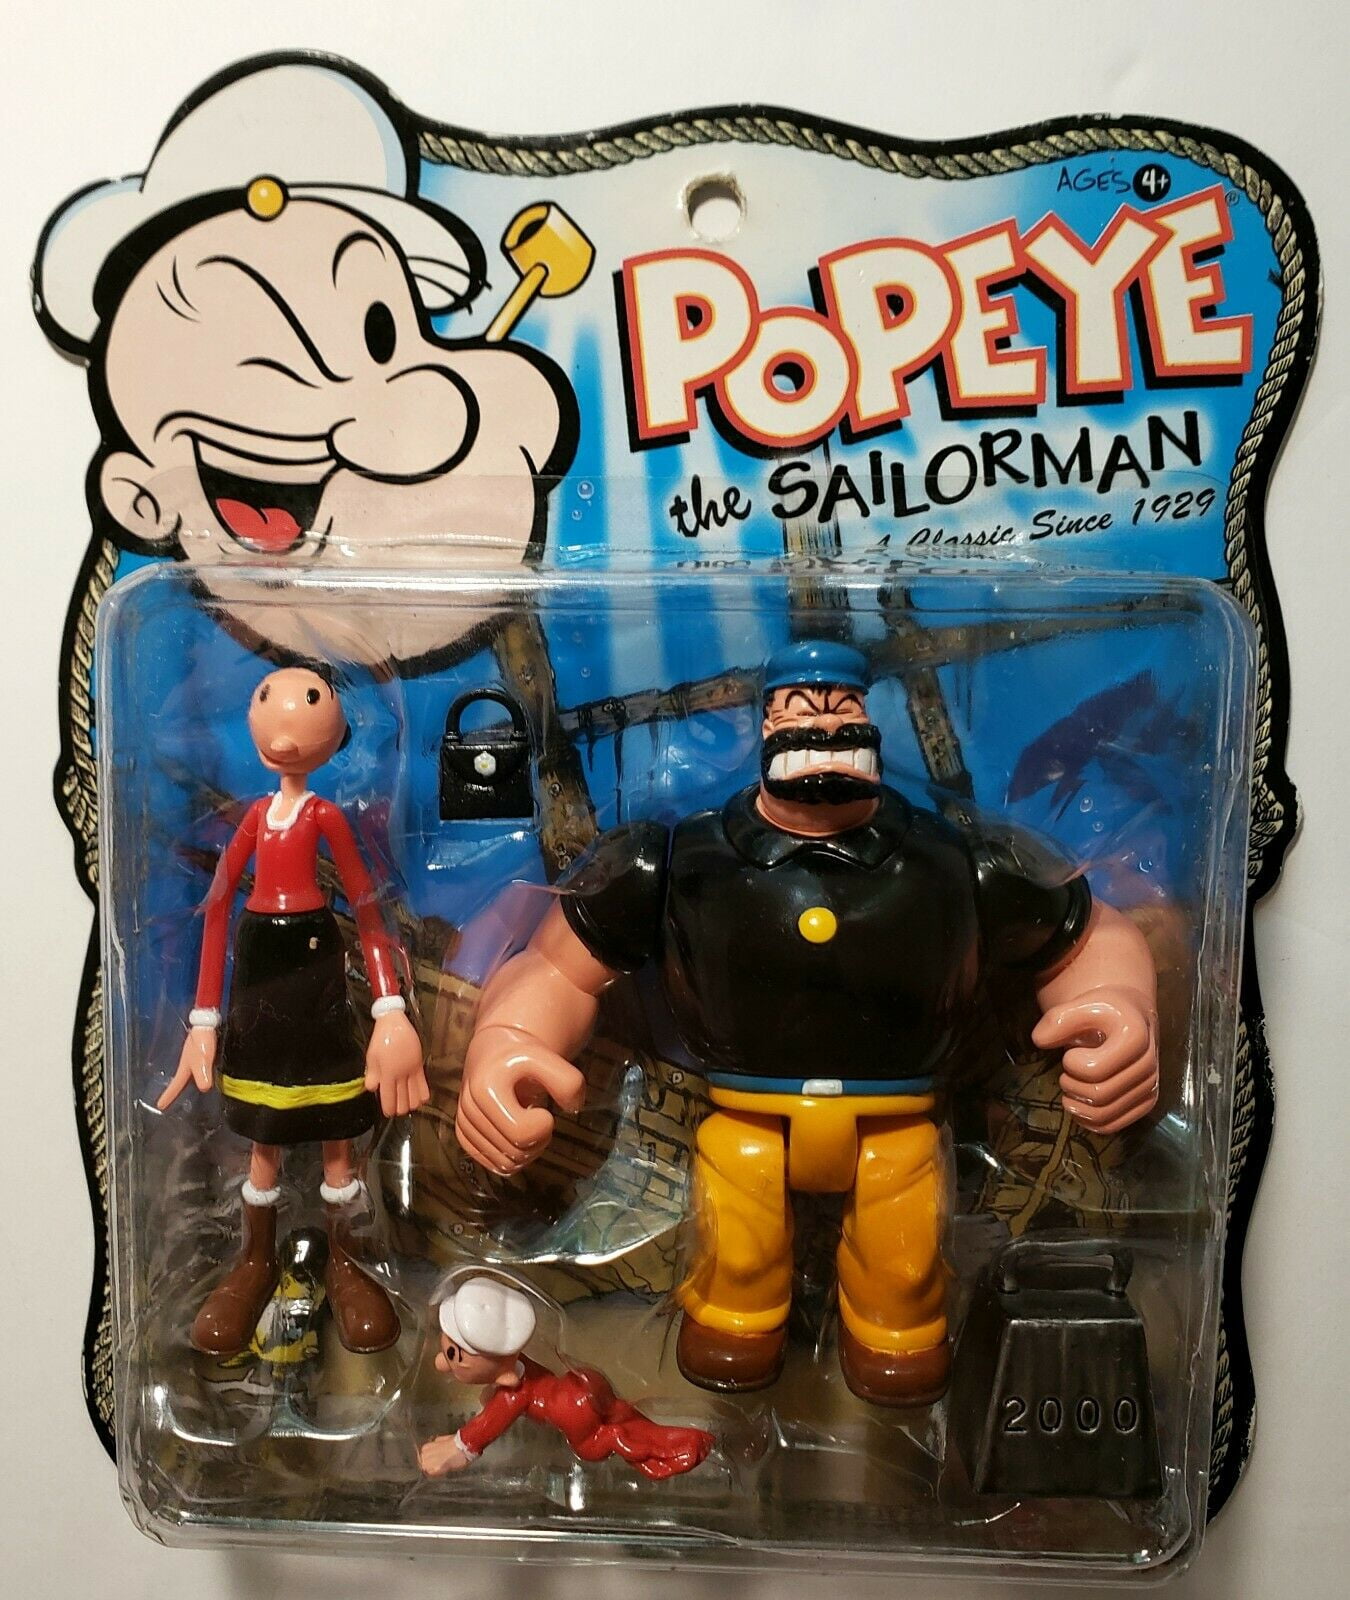 Popeye the Sailor Man Bluto, Olive Oyl, and Swee Pea Action Figures